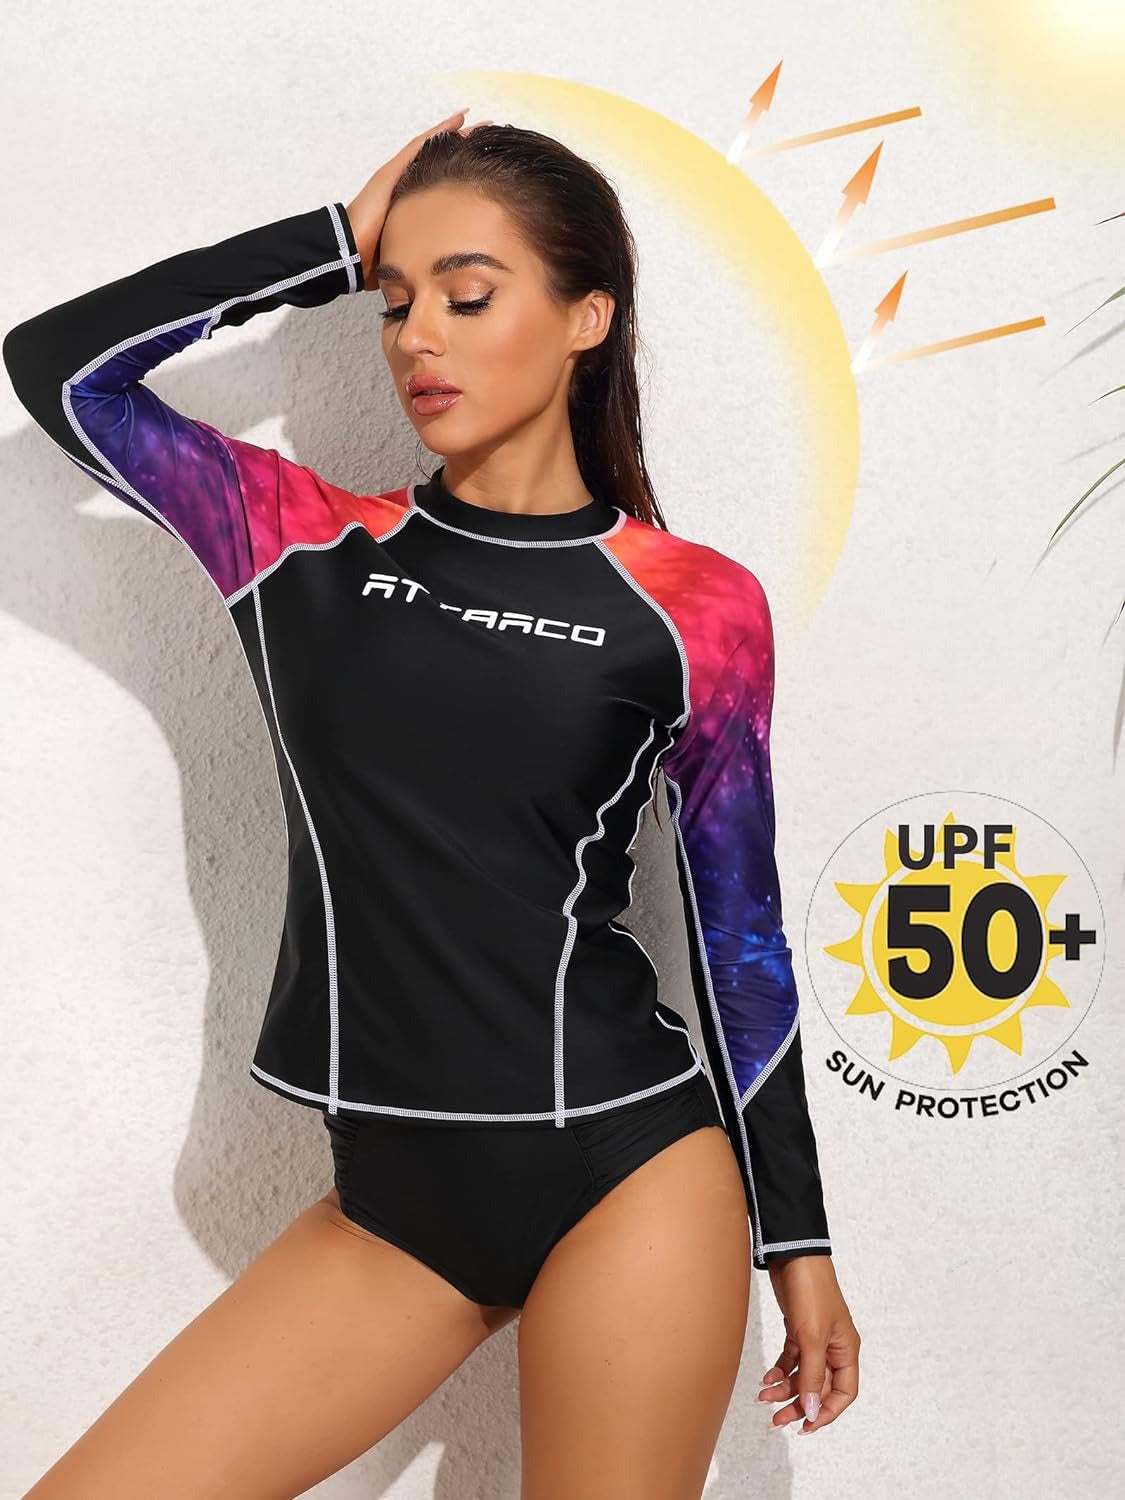 Attraco Rash Guard for Women Wasleve Long Eleeve Gradient Color Shirt Swim